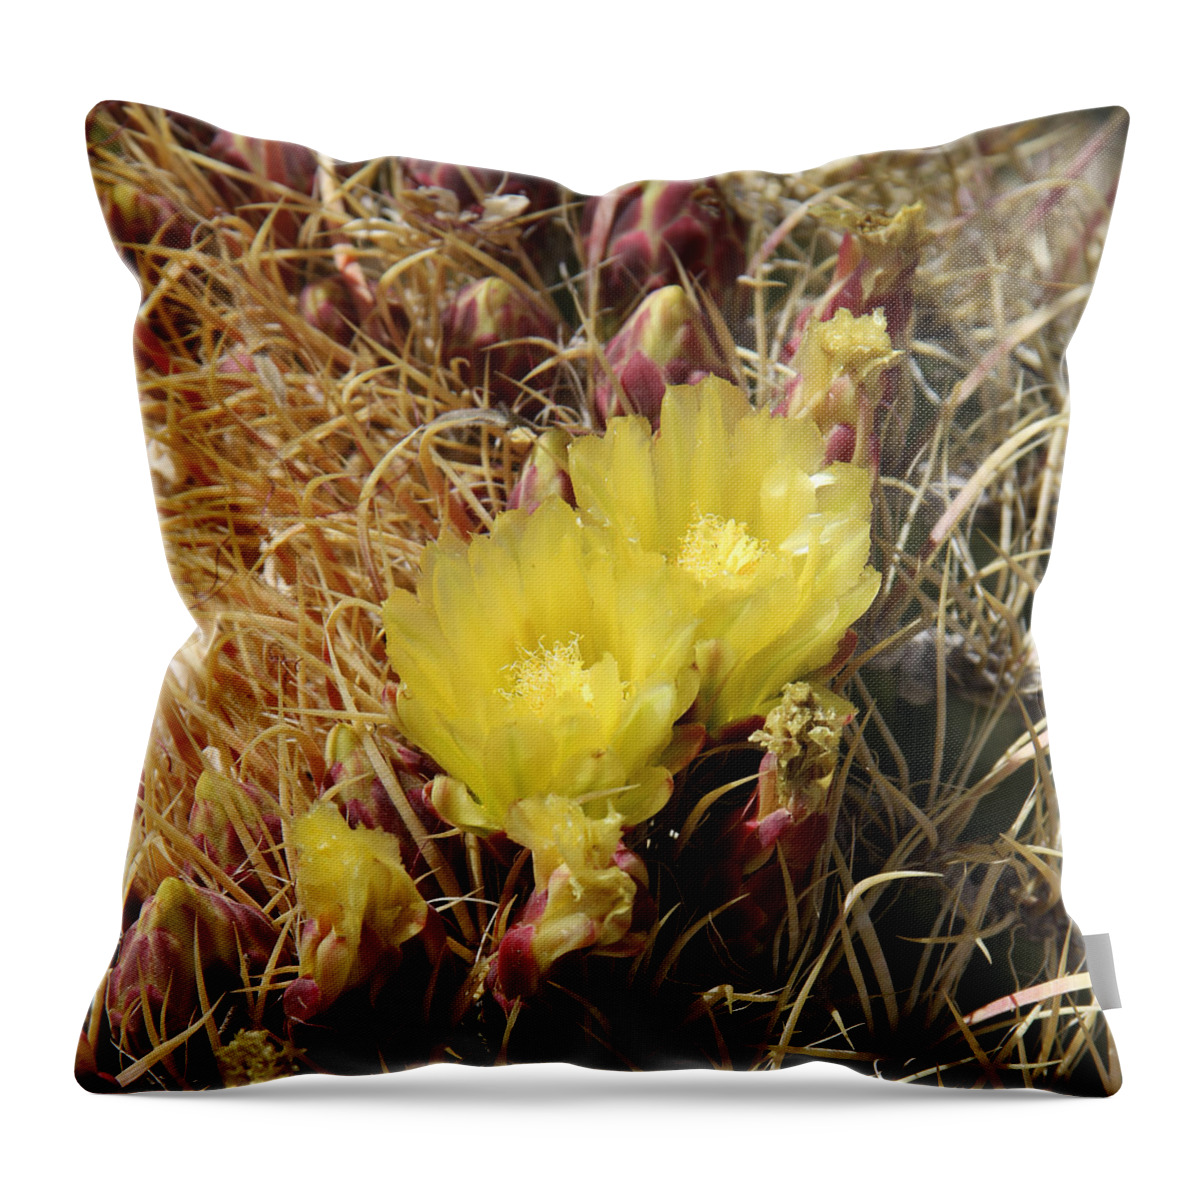 Cactus Throw Pillow featuring the photograph Cactus Flower in Bloom by Mike McGlothlen